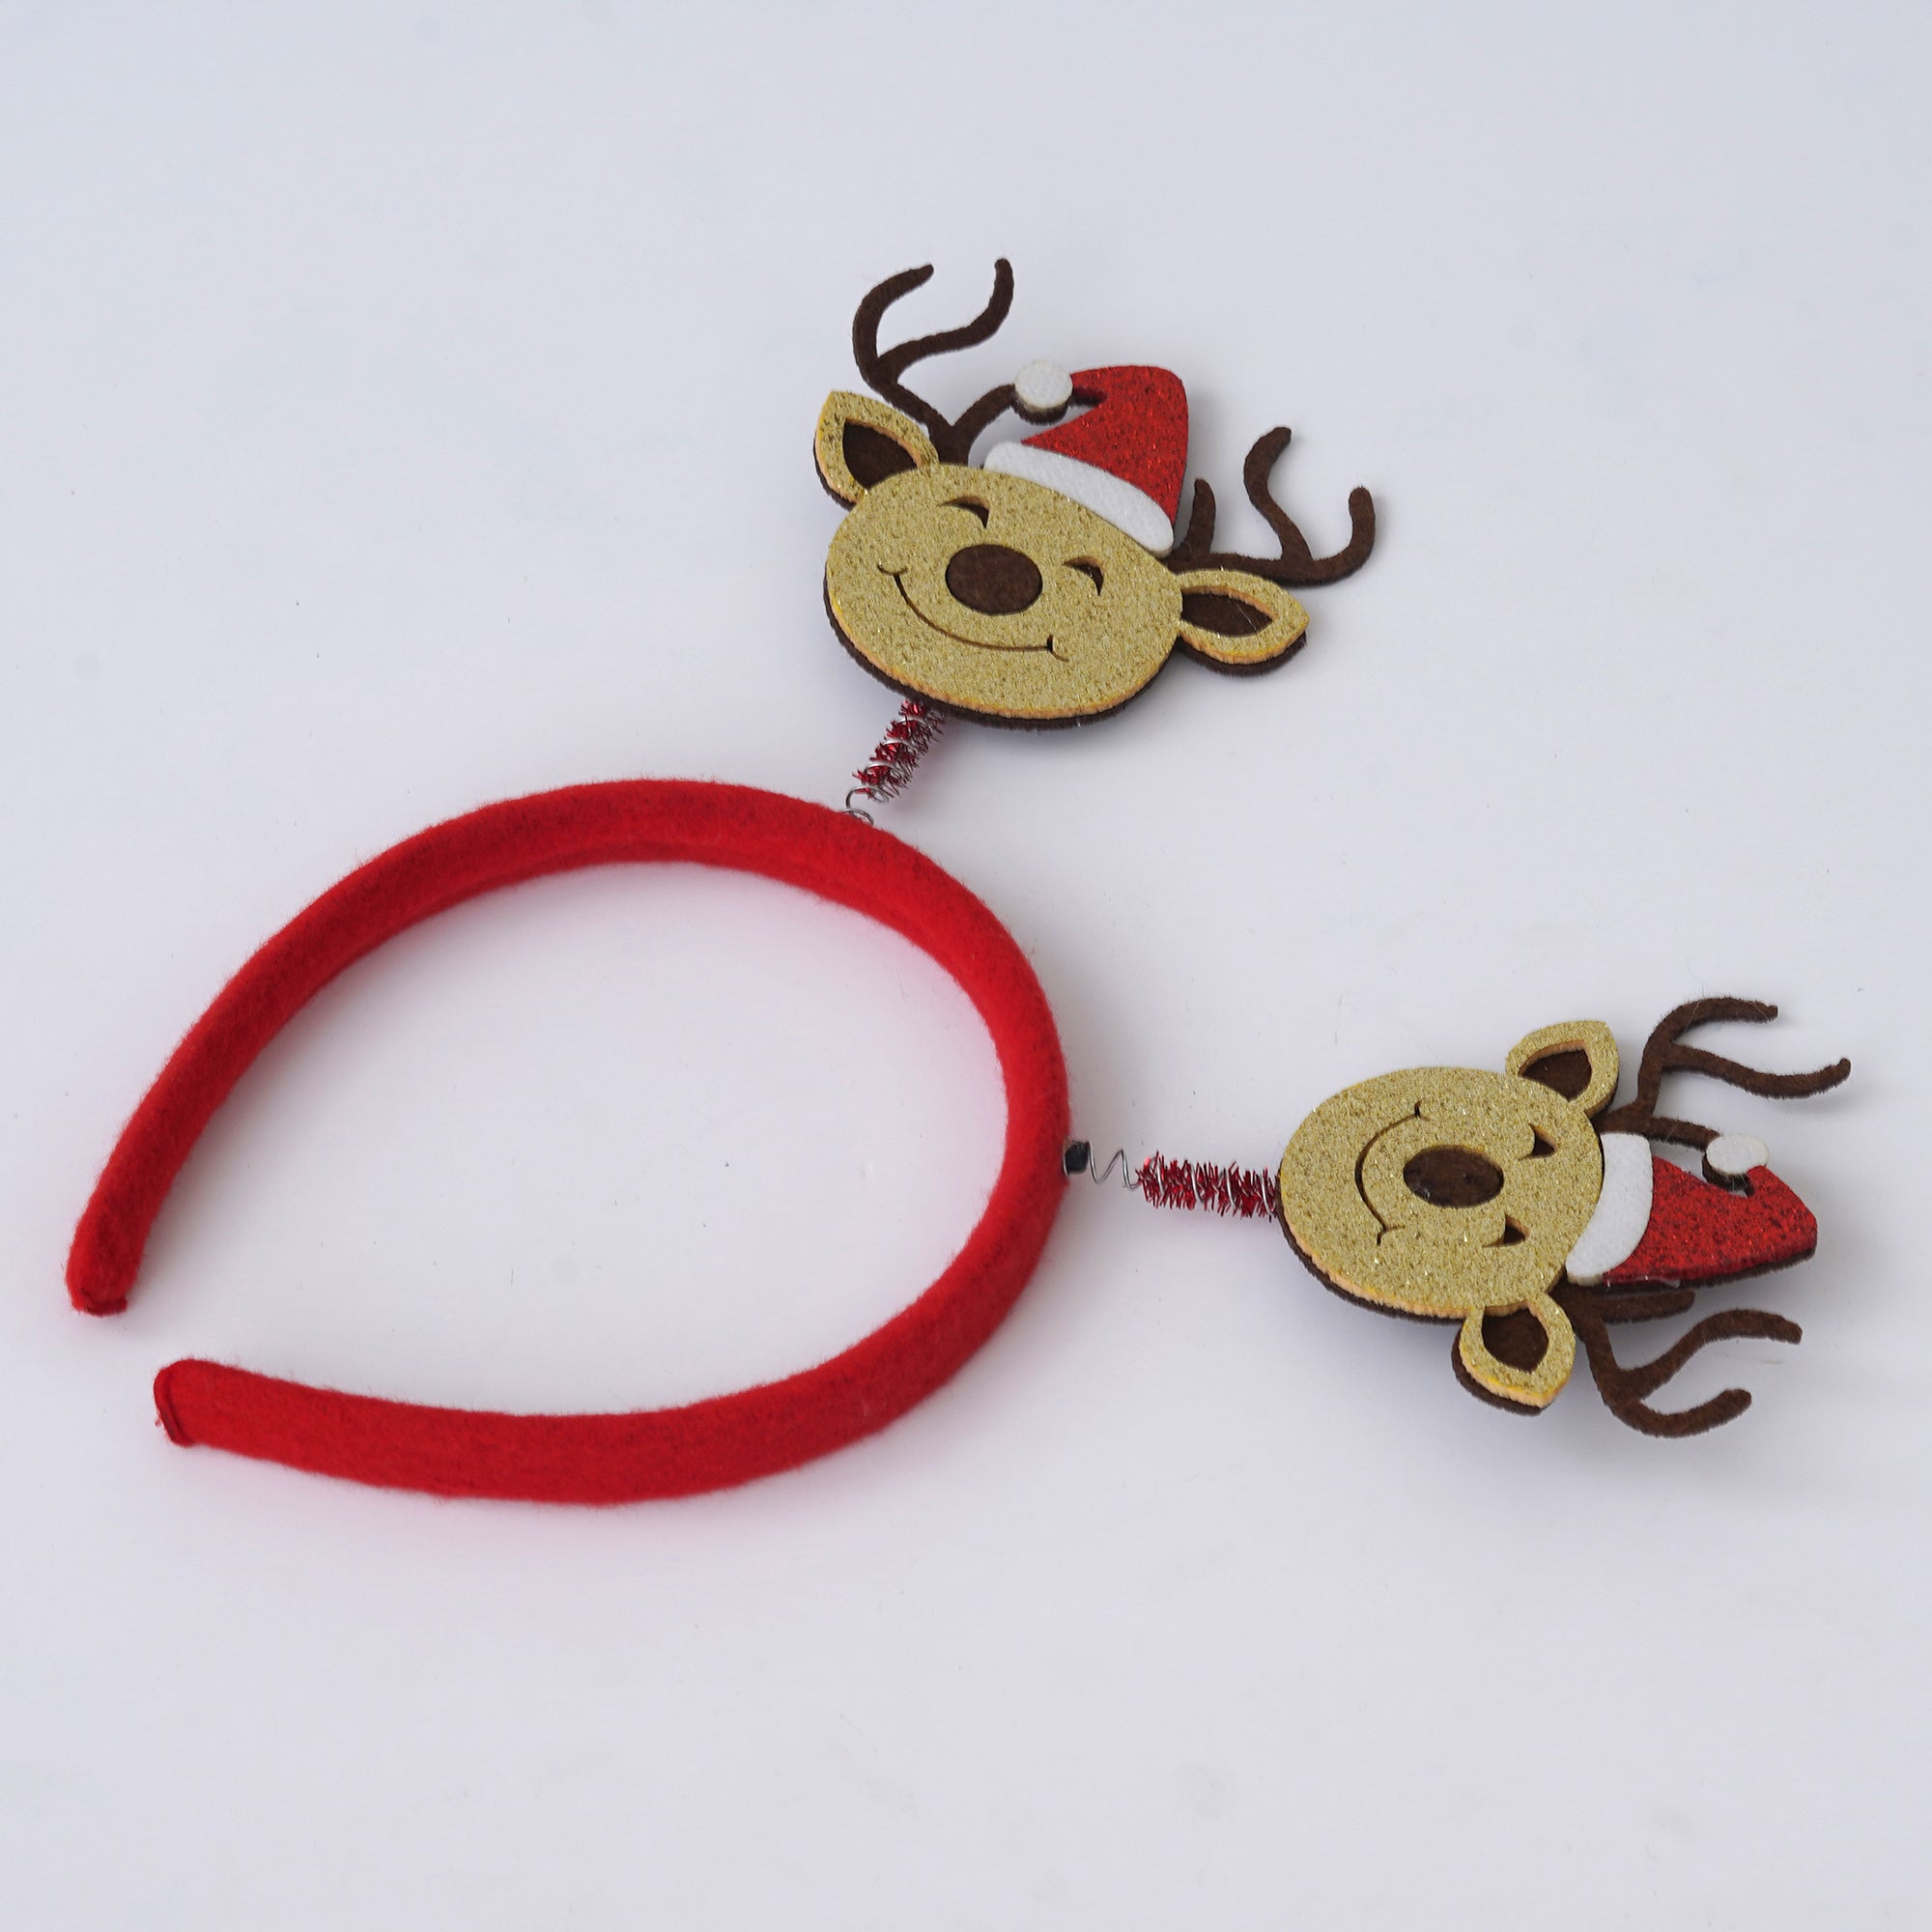 eCraftIndia Christmas Reindeer Design Headband for Christmas and Birthday Parties  Best Gift for Women, Girls, and Kids 5